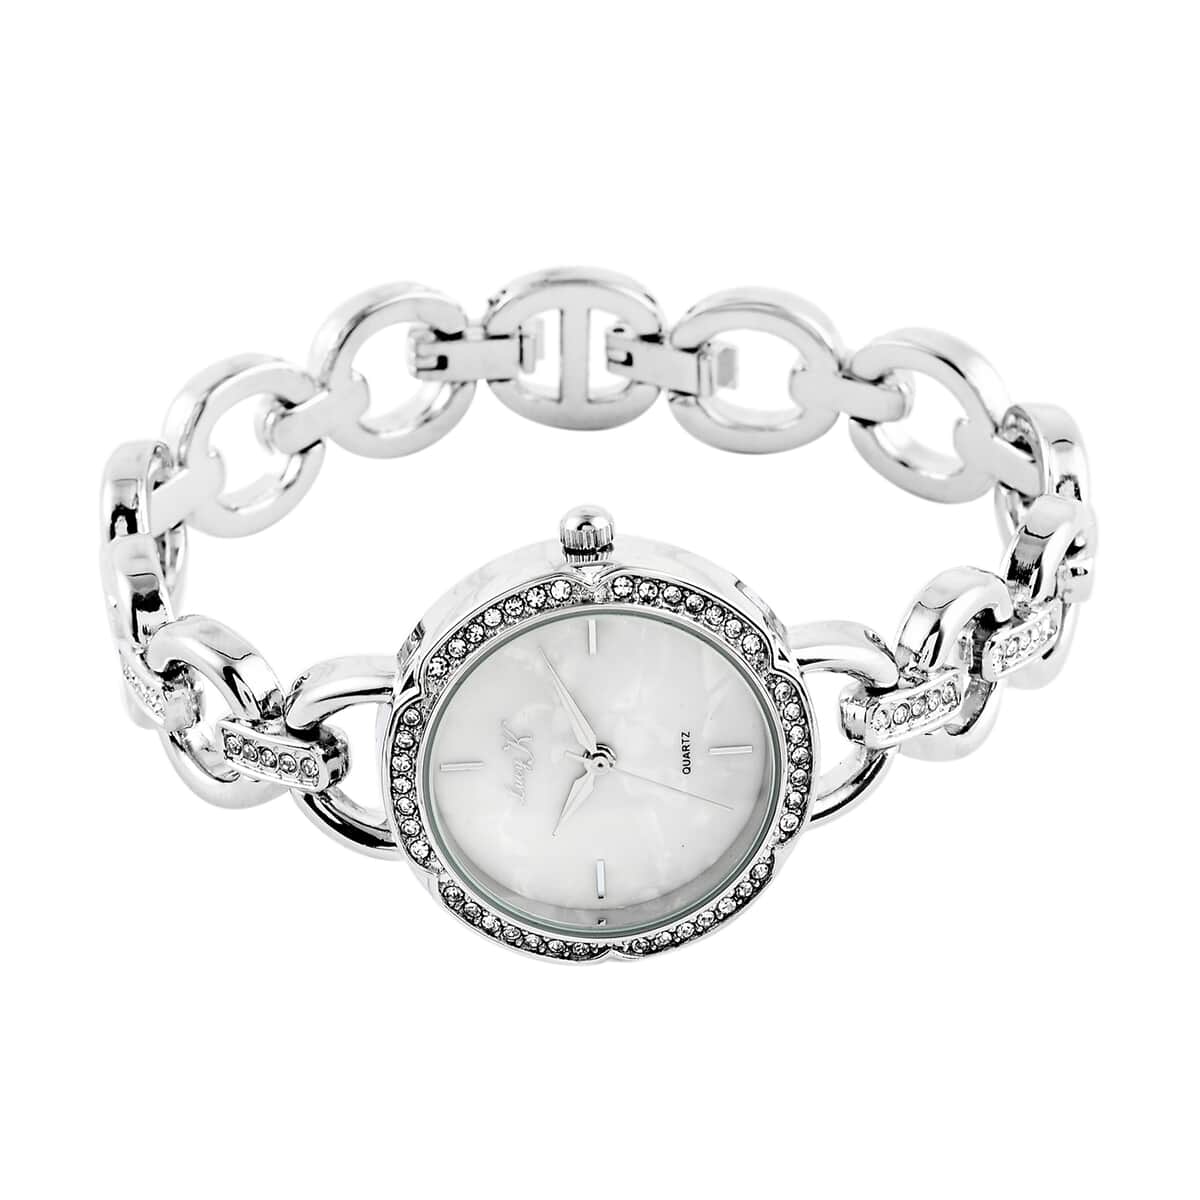 LUCY K Japanese Movement Watch with Faux MOP Dial and Cable Strap in Silvertone image number 3